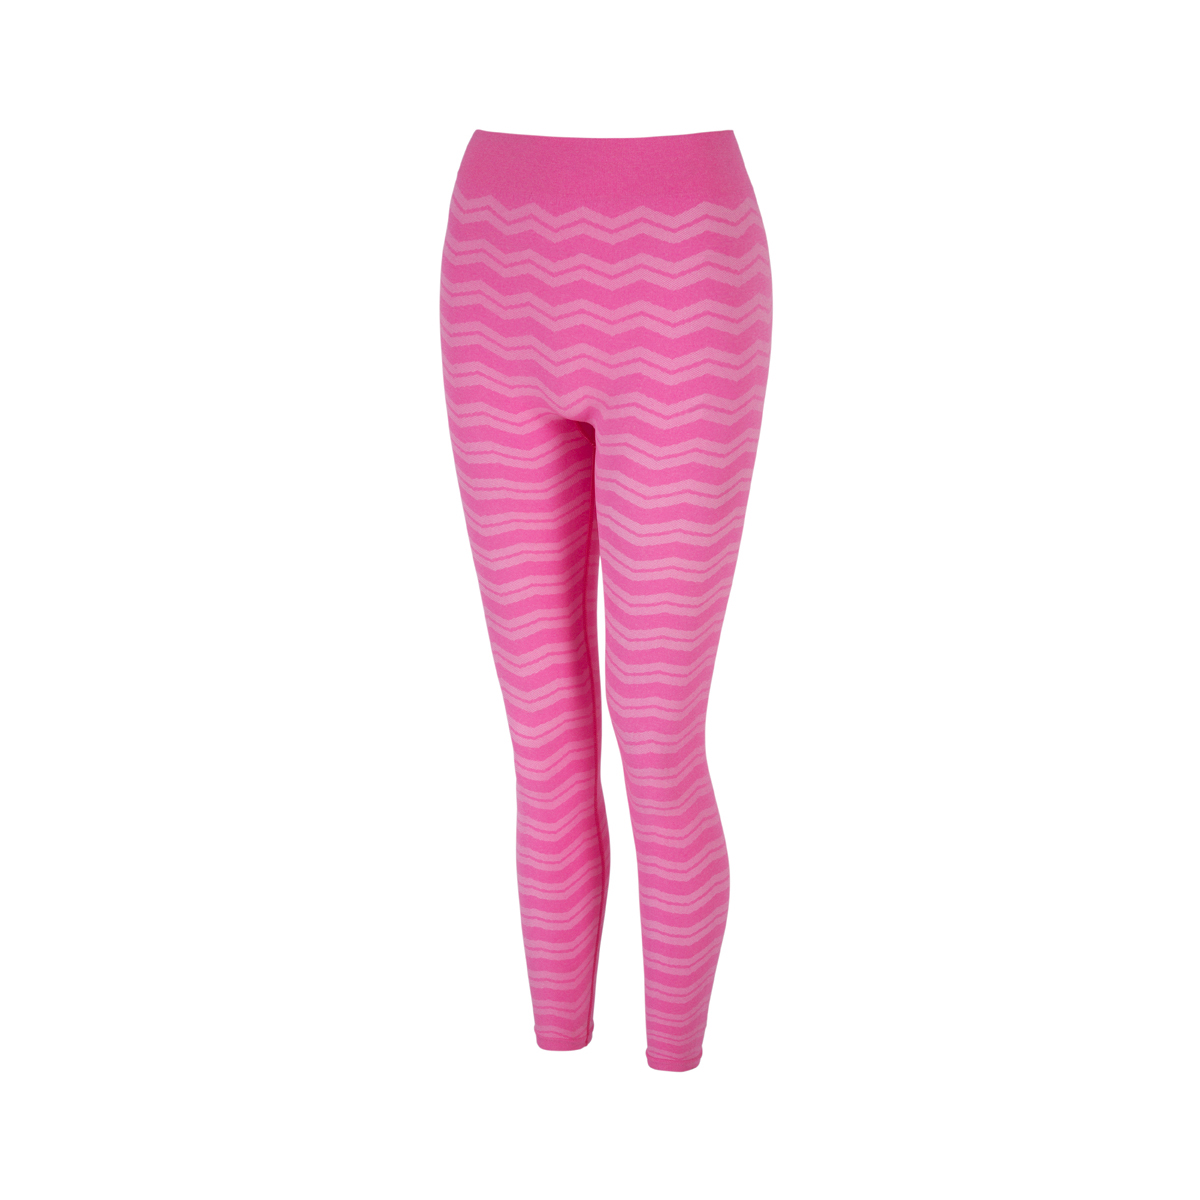 Catch Me Legging:Neon Pink:Front:£46:www.everysecondcounts.co.uk